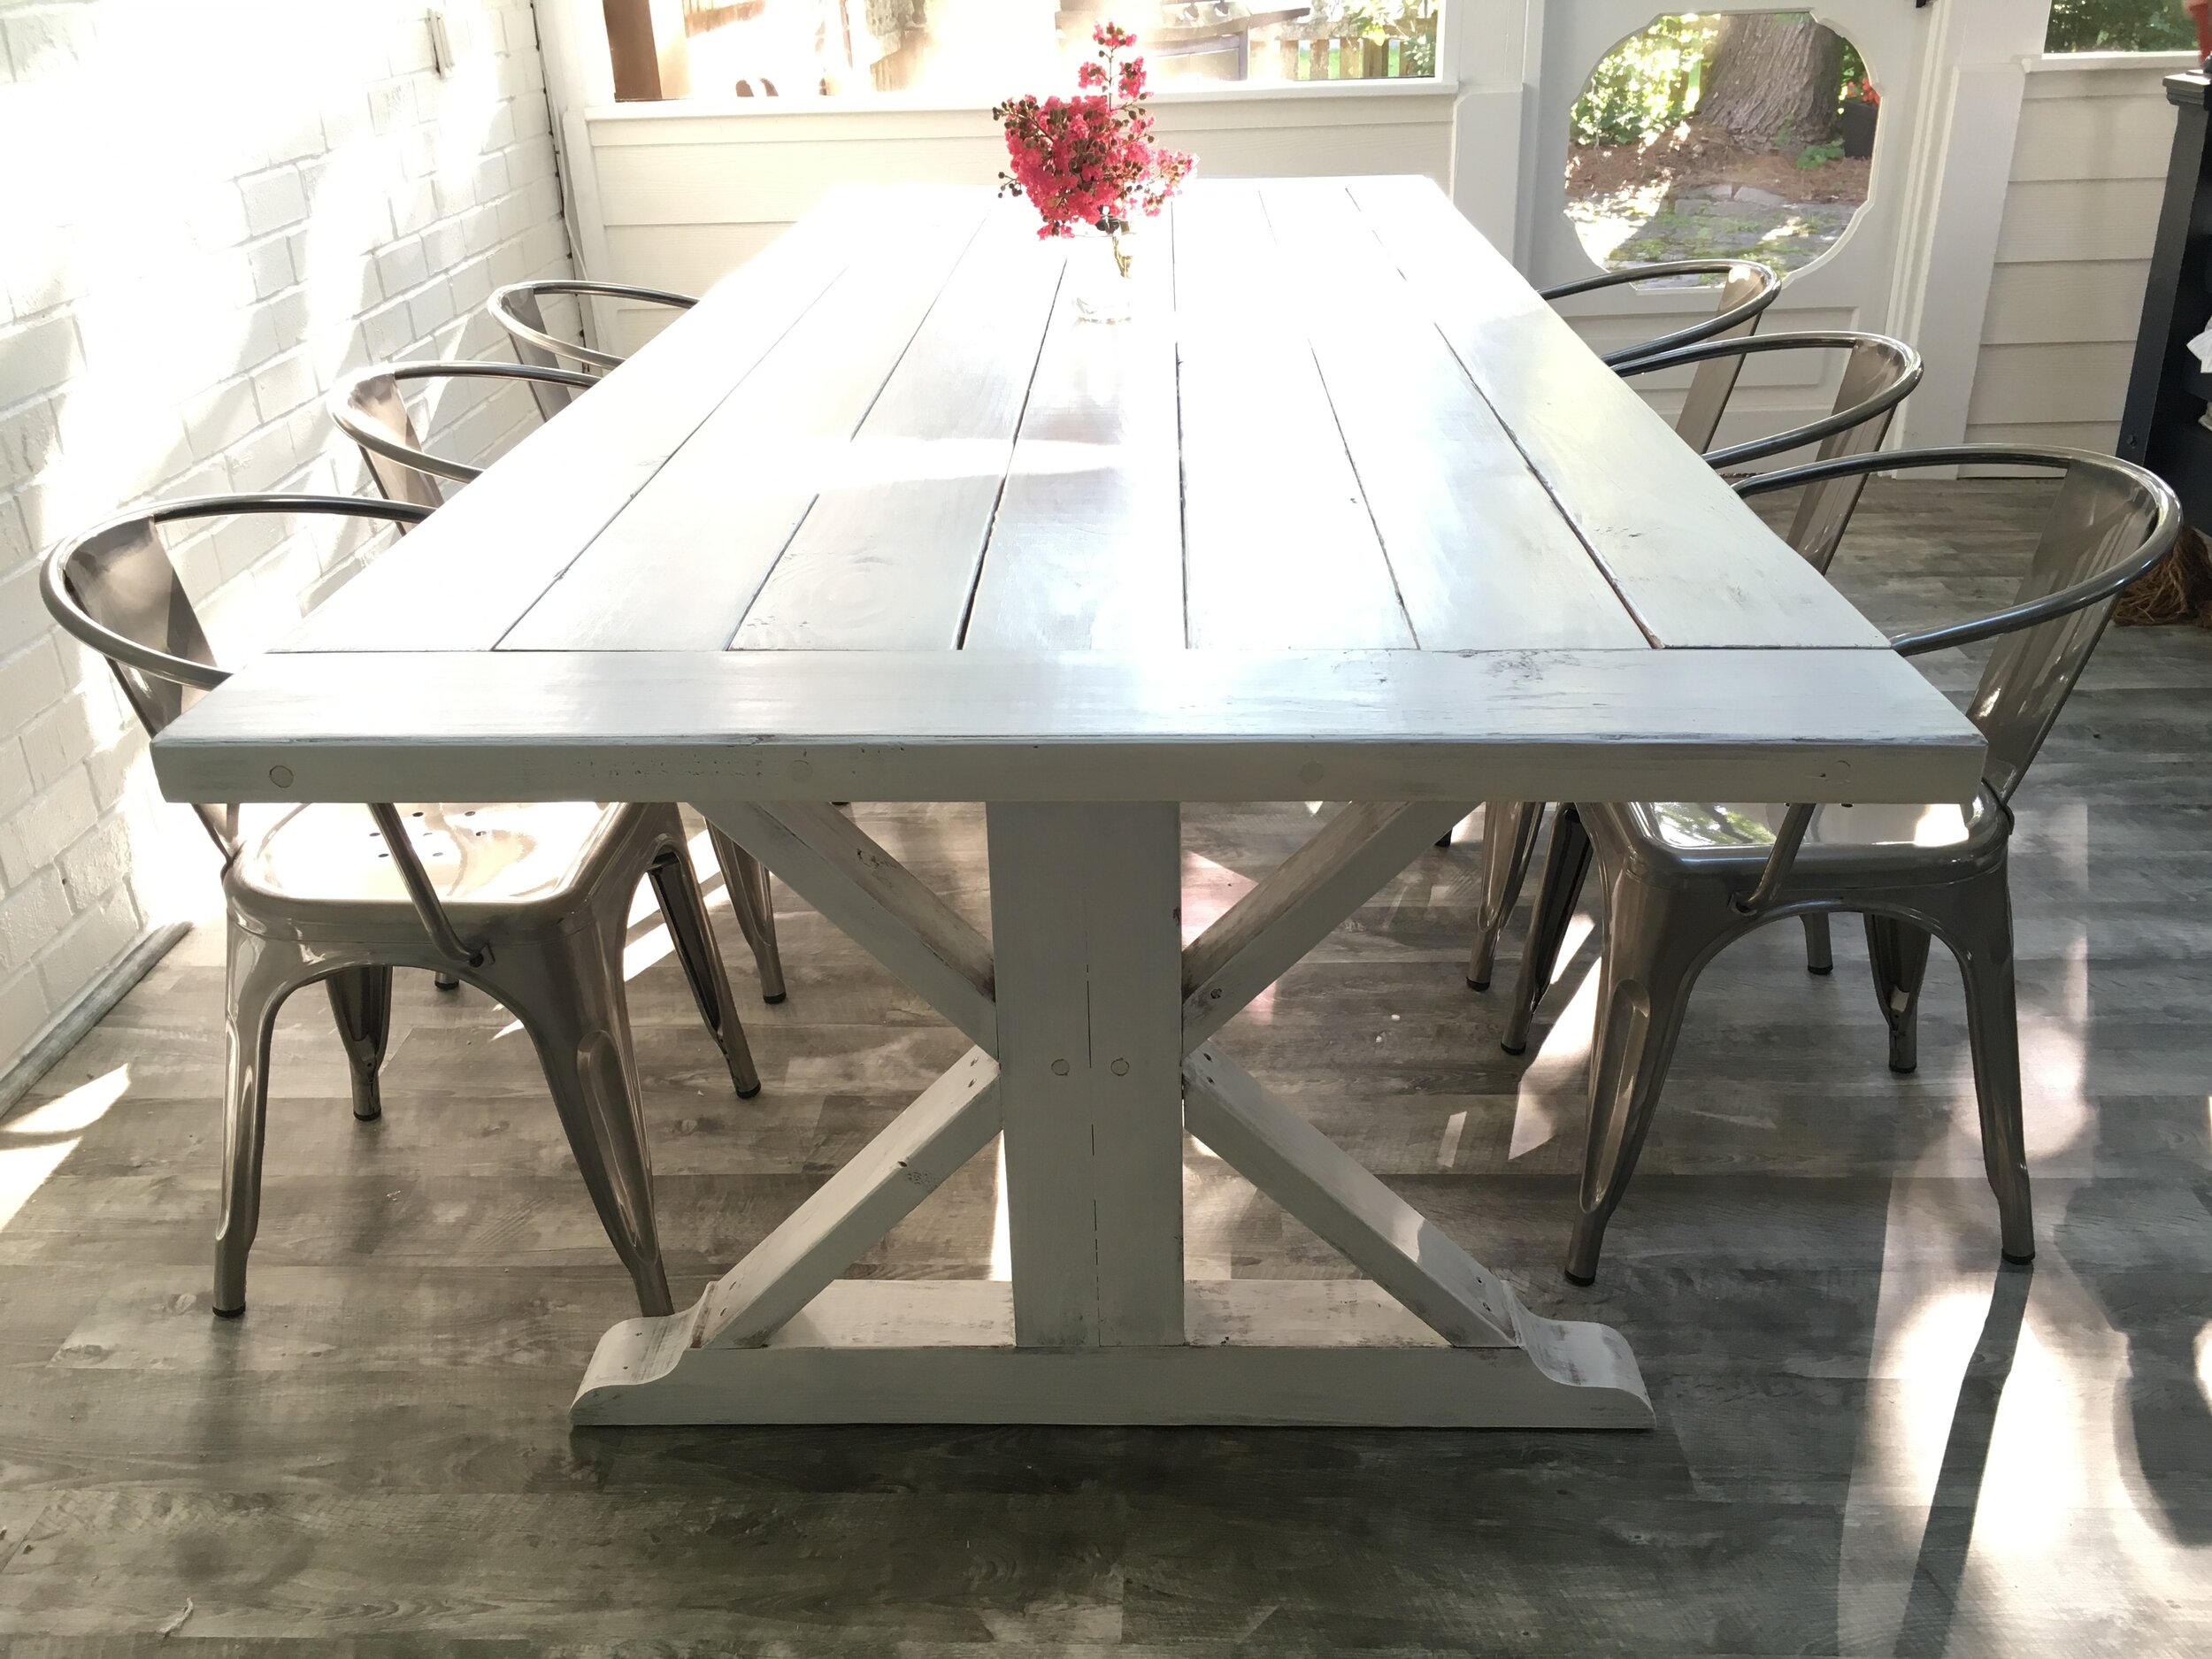 Patio Table with X-Base